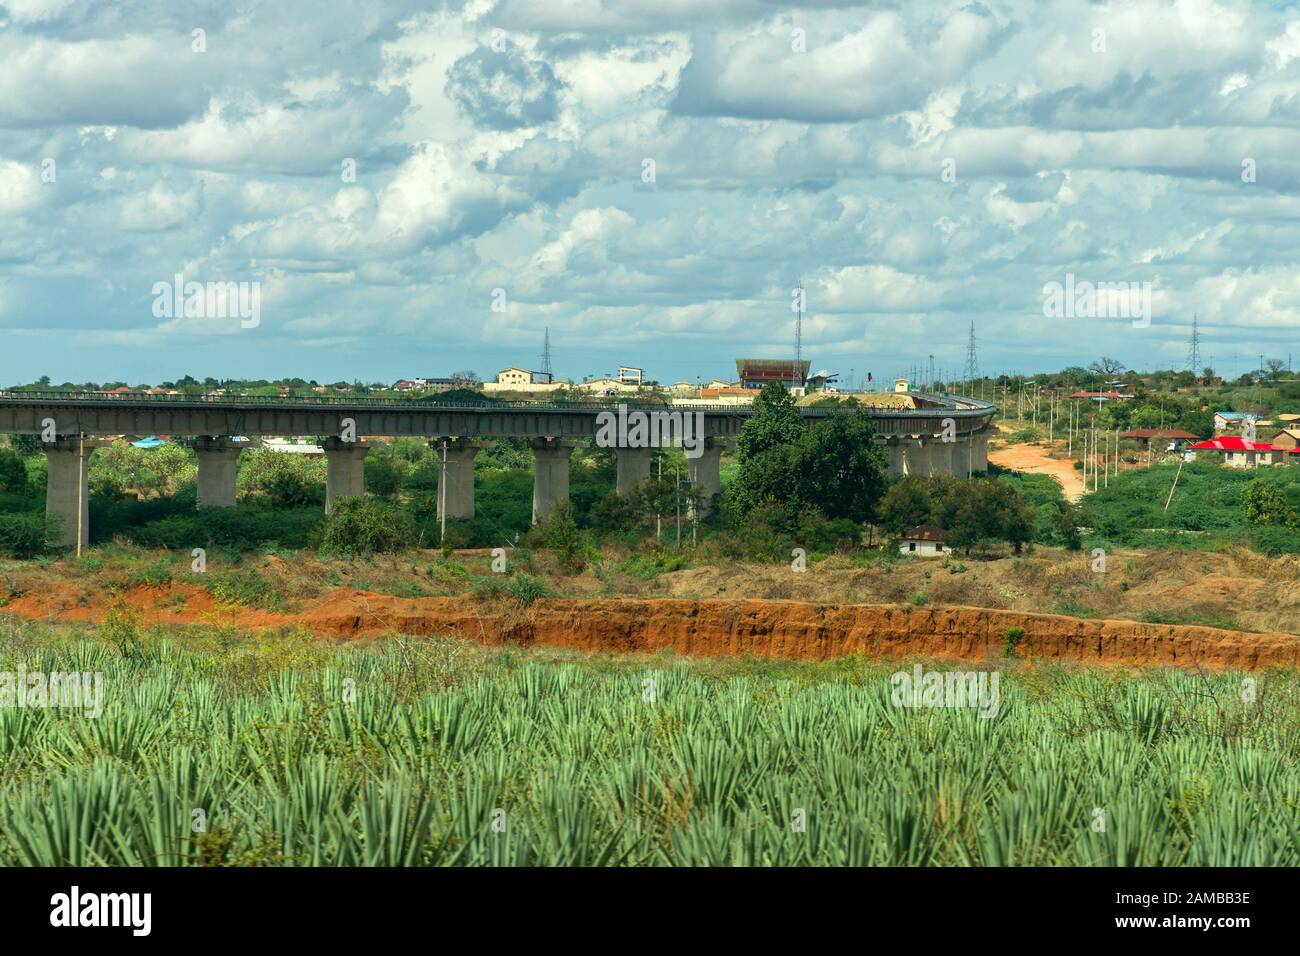 An elevated section of the Standard Gauge Railway (SGR) passing through rural Kenya Stock Photo